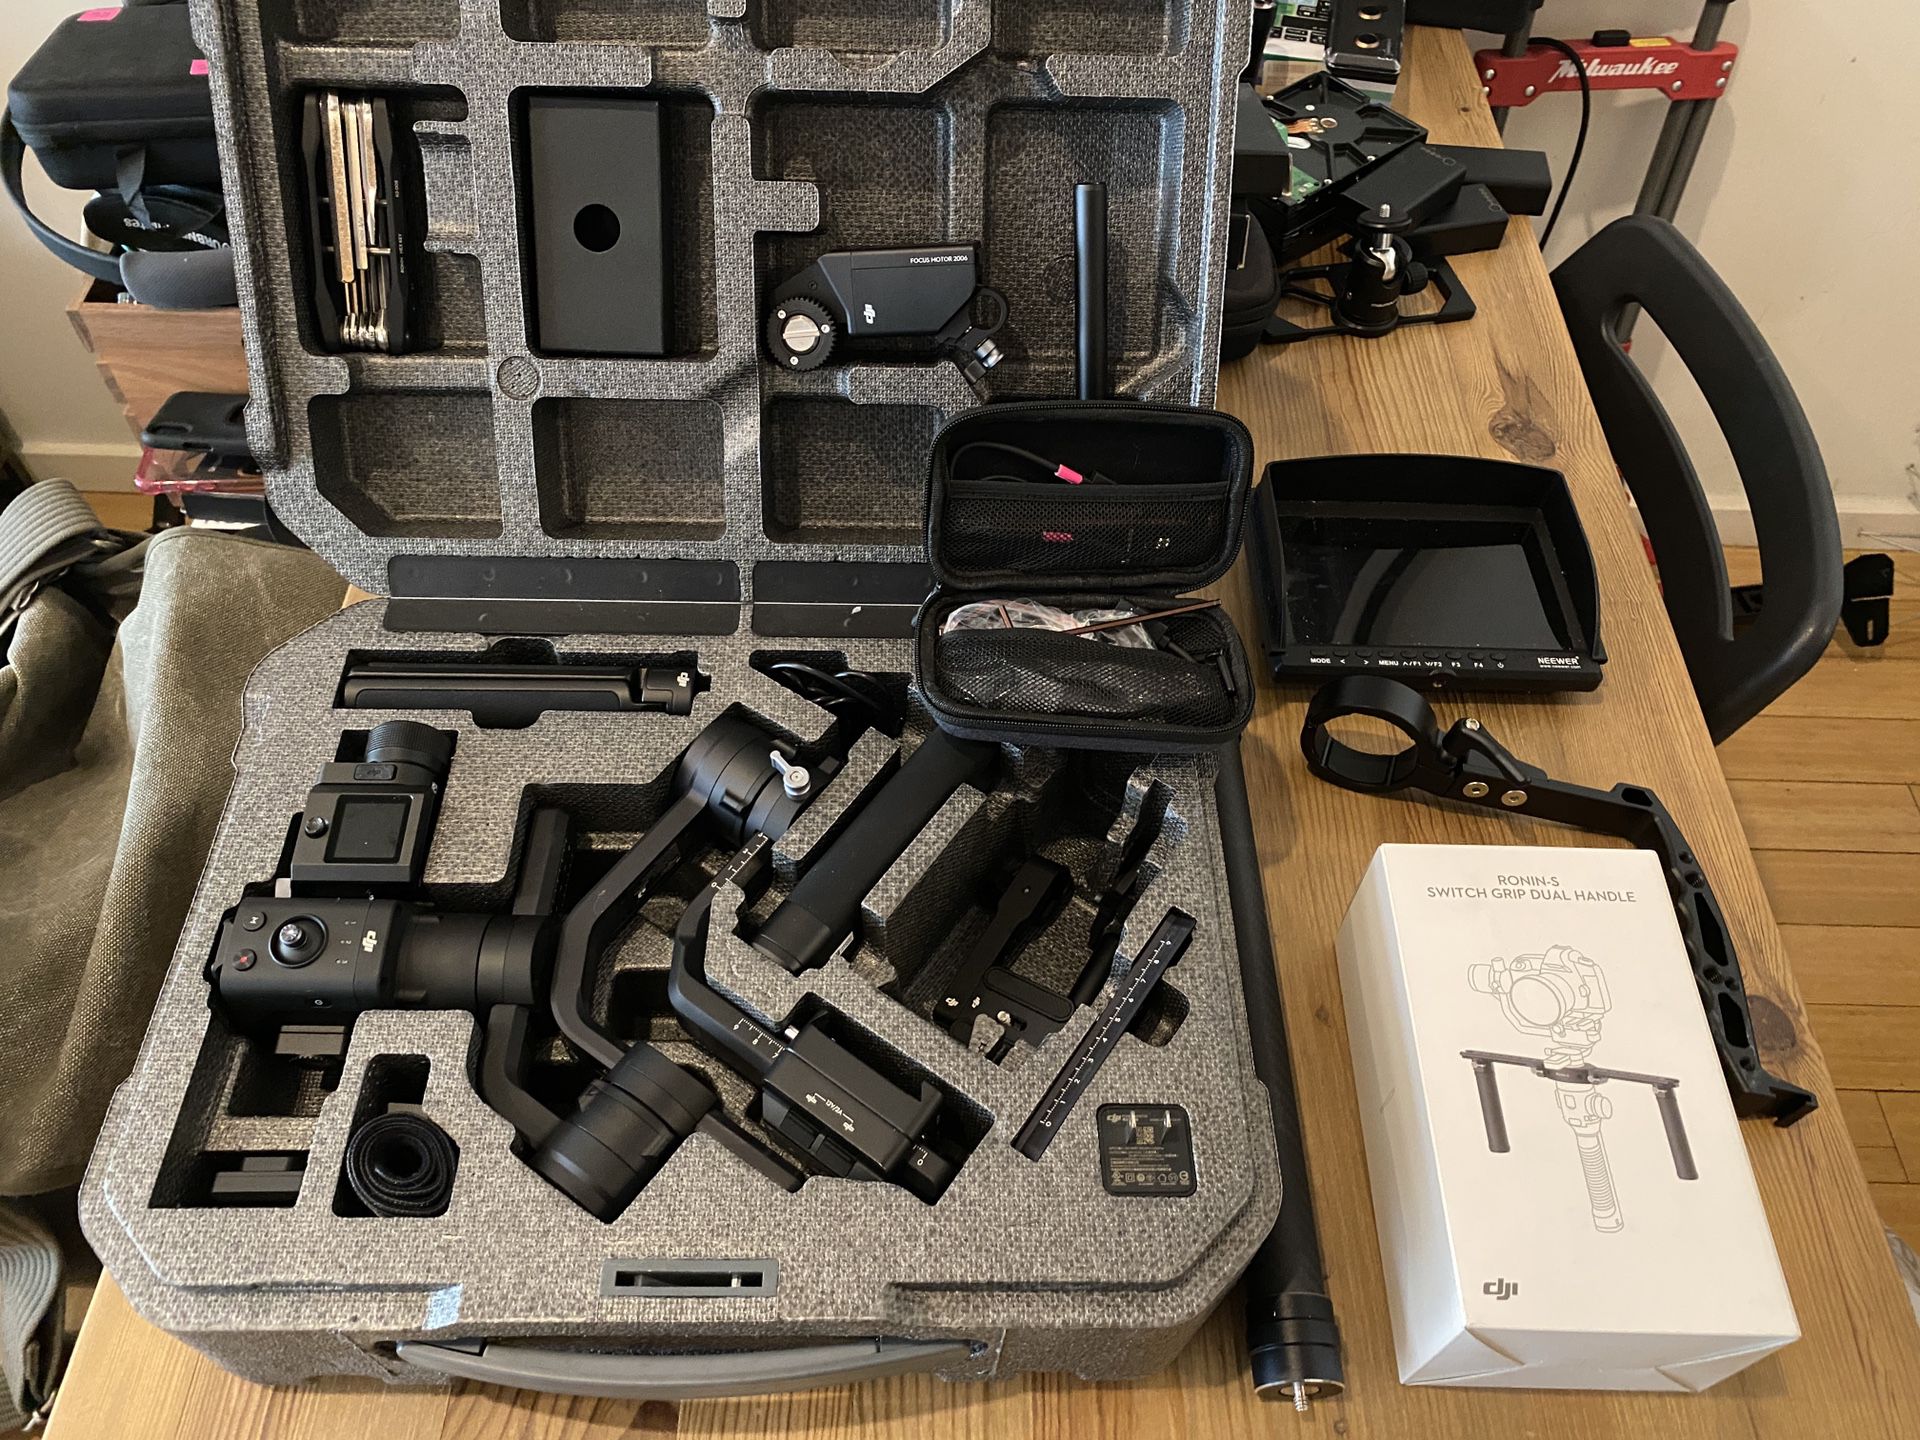 DJI Ronin S with most of the available accessories